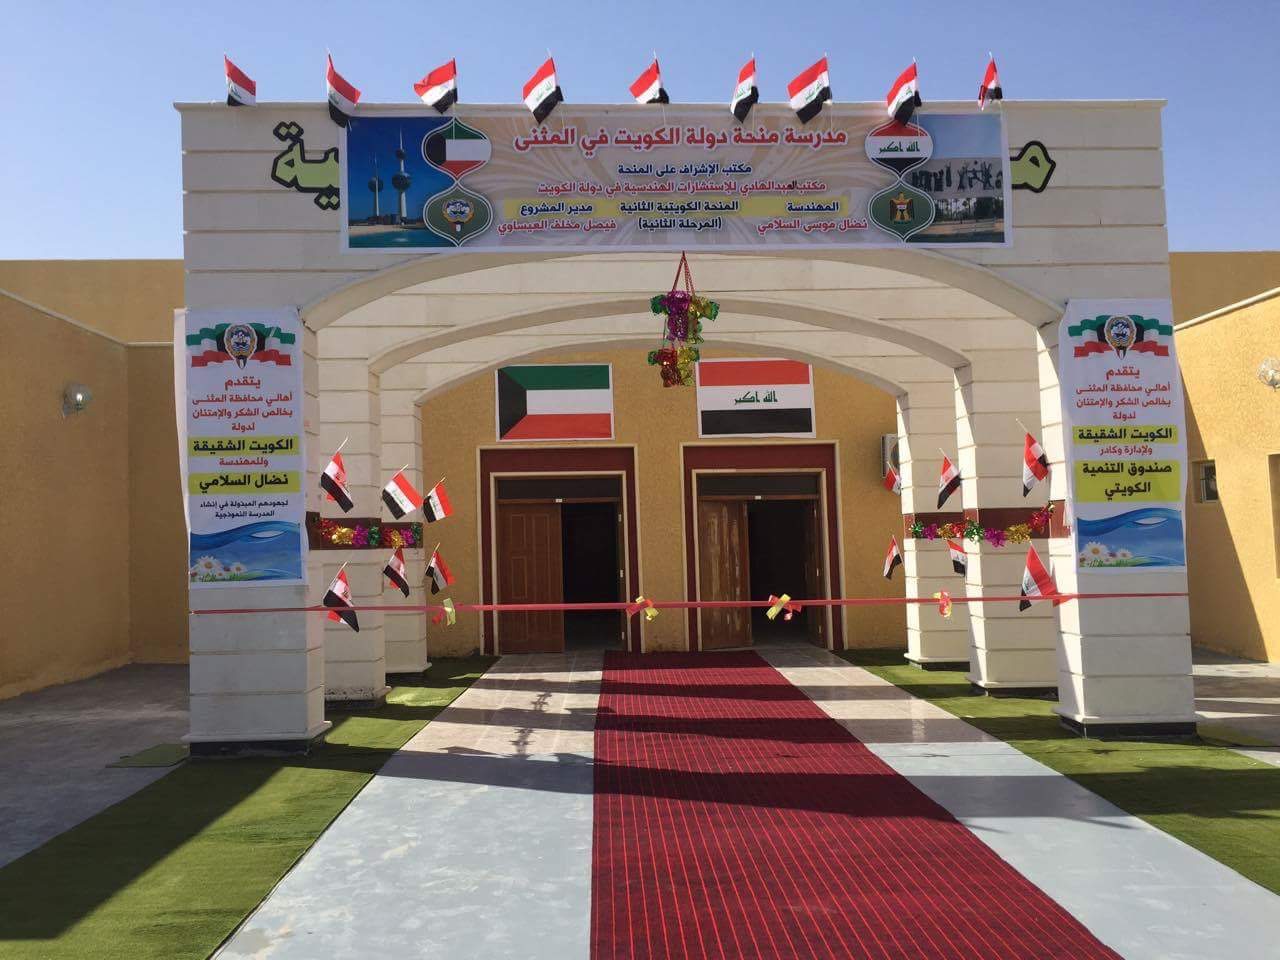 A new school opens in southern Iraq financed from kuwait